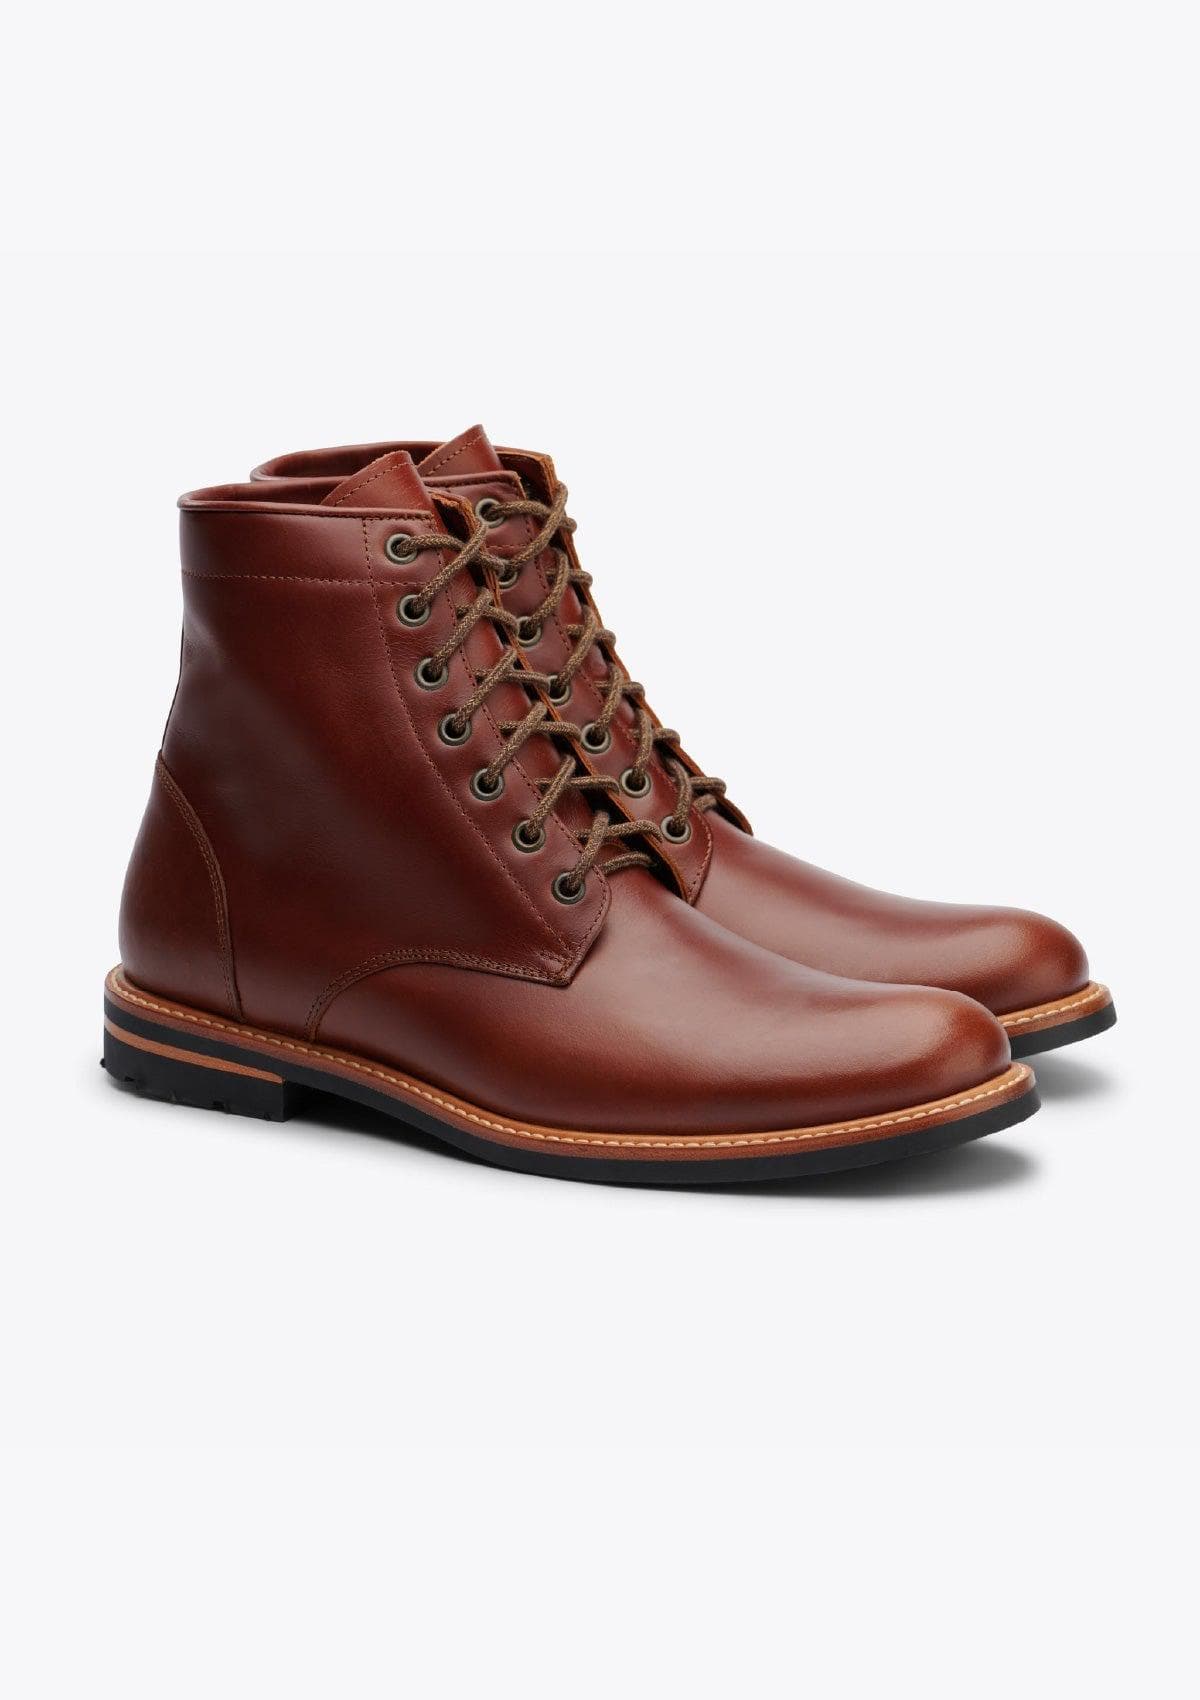 All-Weather Andres Boots - Brandy